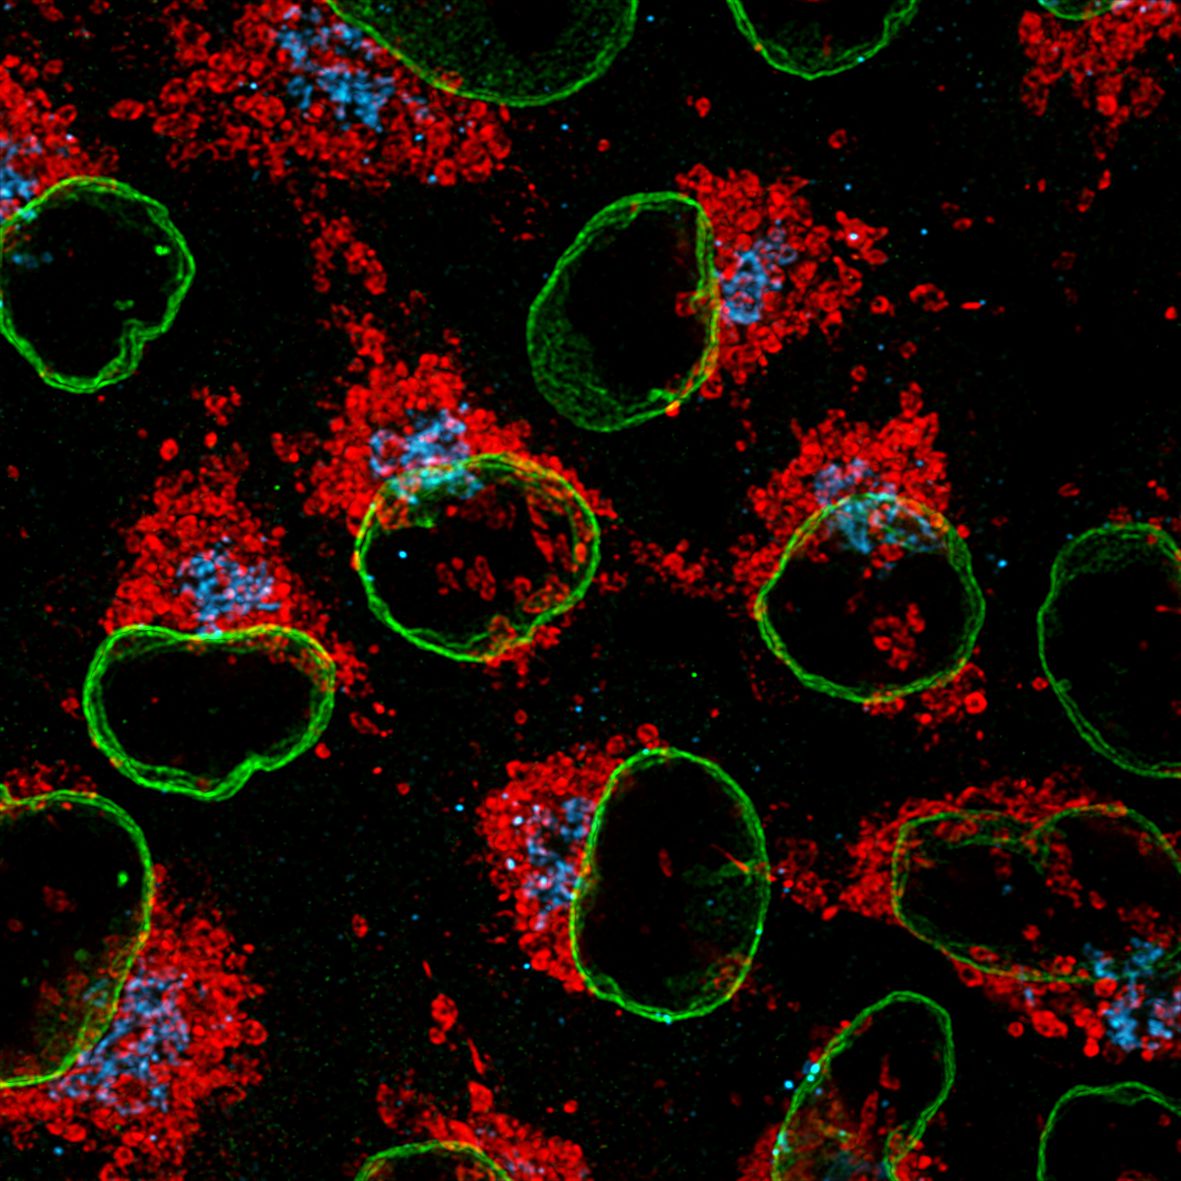 Immunofluorescence of HeLa: PFA-fixed HeLa cells were stained with anti-Lamin B1 (66095-1-Ig) labeled with FlexAble CoraLite® Plus 488 Kit (KFA021, green), anti-HSP60 (66041-1-Ig) labeled with FlexAble CoraLite® Plus 555 Kit (KFA022, red) and anti-GORASP2 (66627-1-Ig) labeled with FlexAble CoraLite® Plus 647 Kit (KFA023, cyan).​ Confocal images were acquired with a 100x oil objective and post-processed. Images were recorded at the Core Facility Bioimaging at the Biomedical Center, LMU Munich.